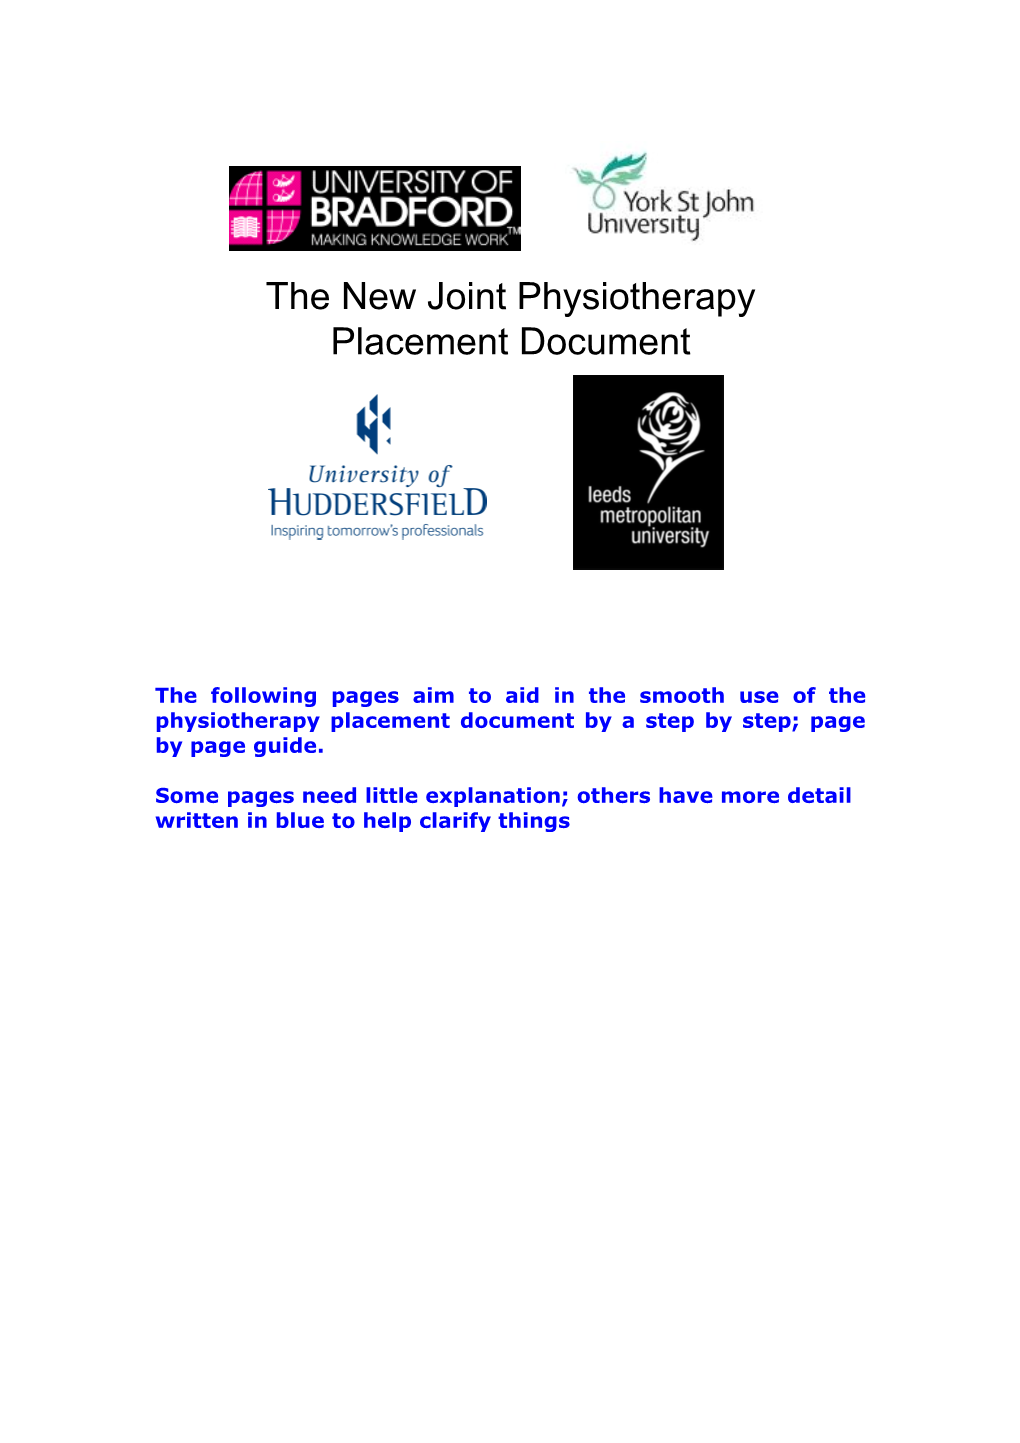 The Following Pages Aim to Aid in the Smooth Use of the Physiotherapy Placement Document